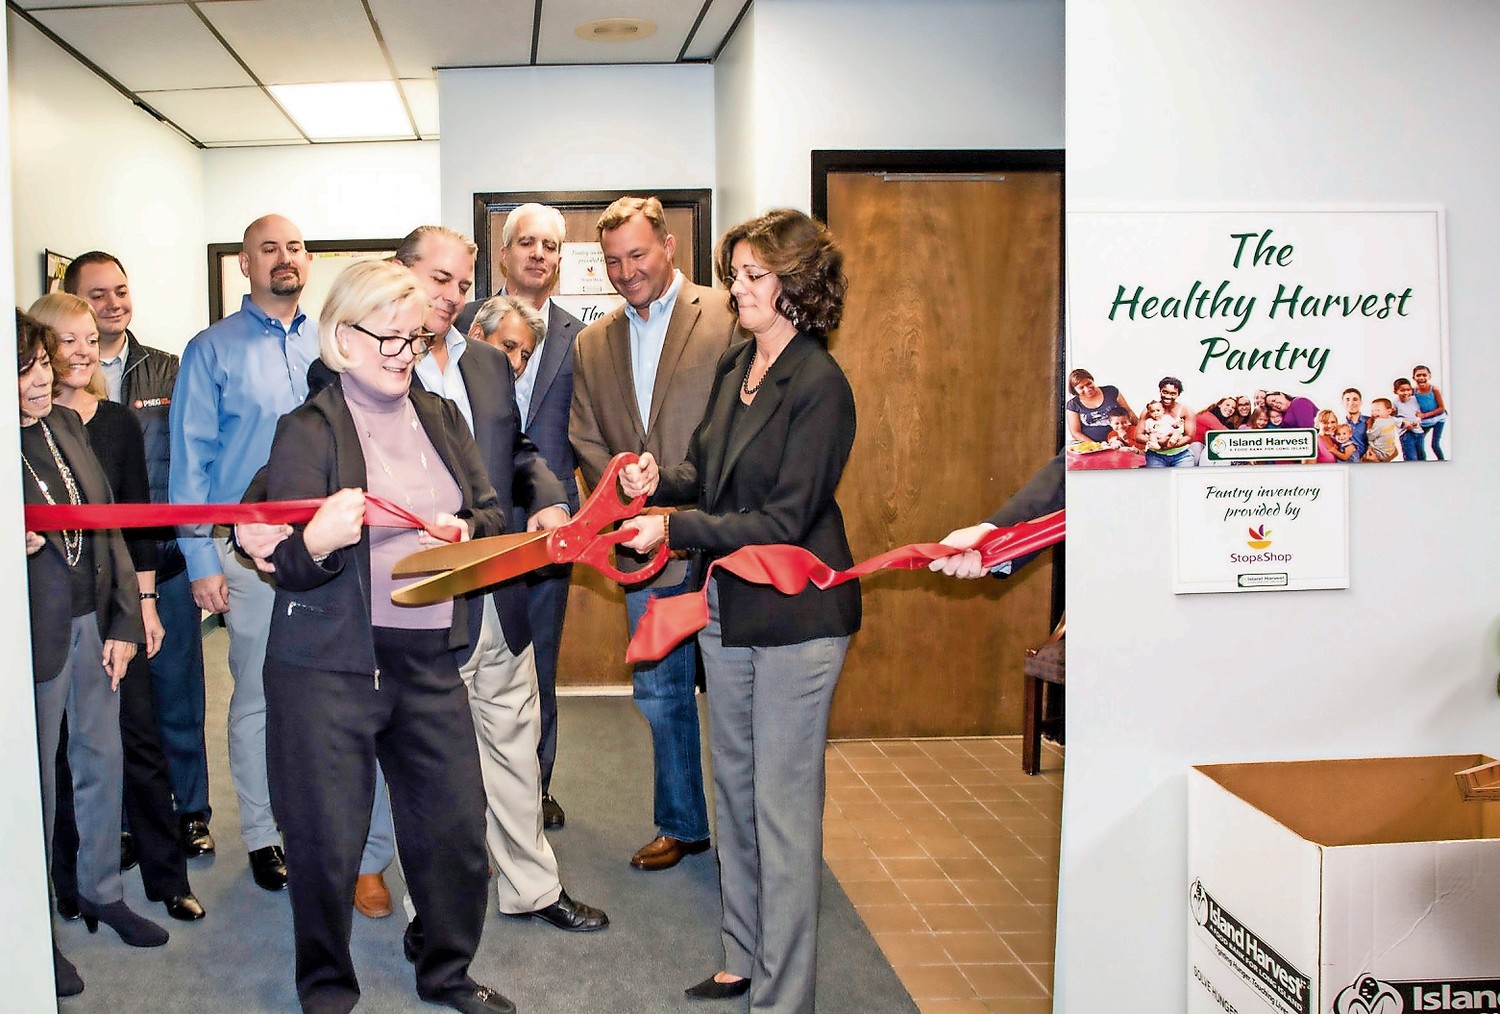 Cynthia G. Scott, executive director of The Safe Center LI, left, and Randi Shubin Dresner, president and CEO of Island Harvest Food Bank, cut the ribbon to officially open the Healthy Harvest Pantry in Bethpage, surrounded by board members of both organizations.